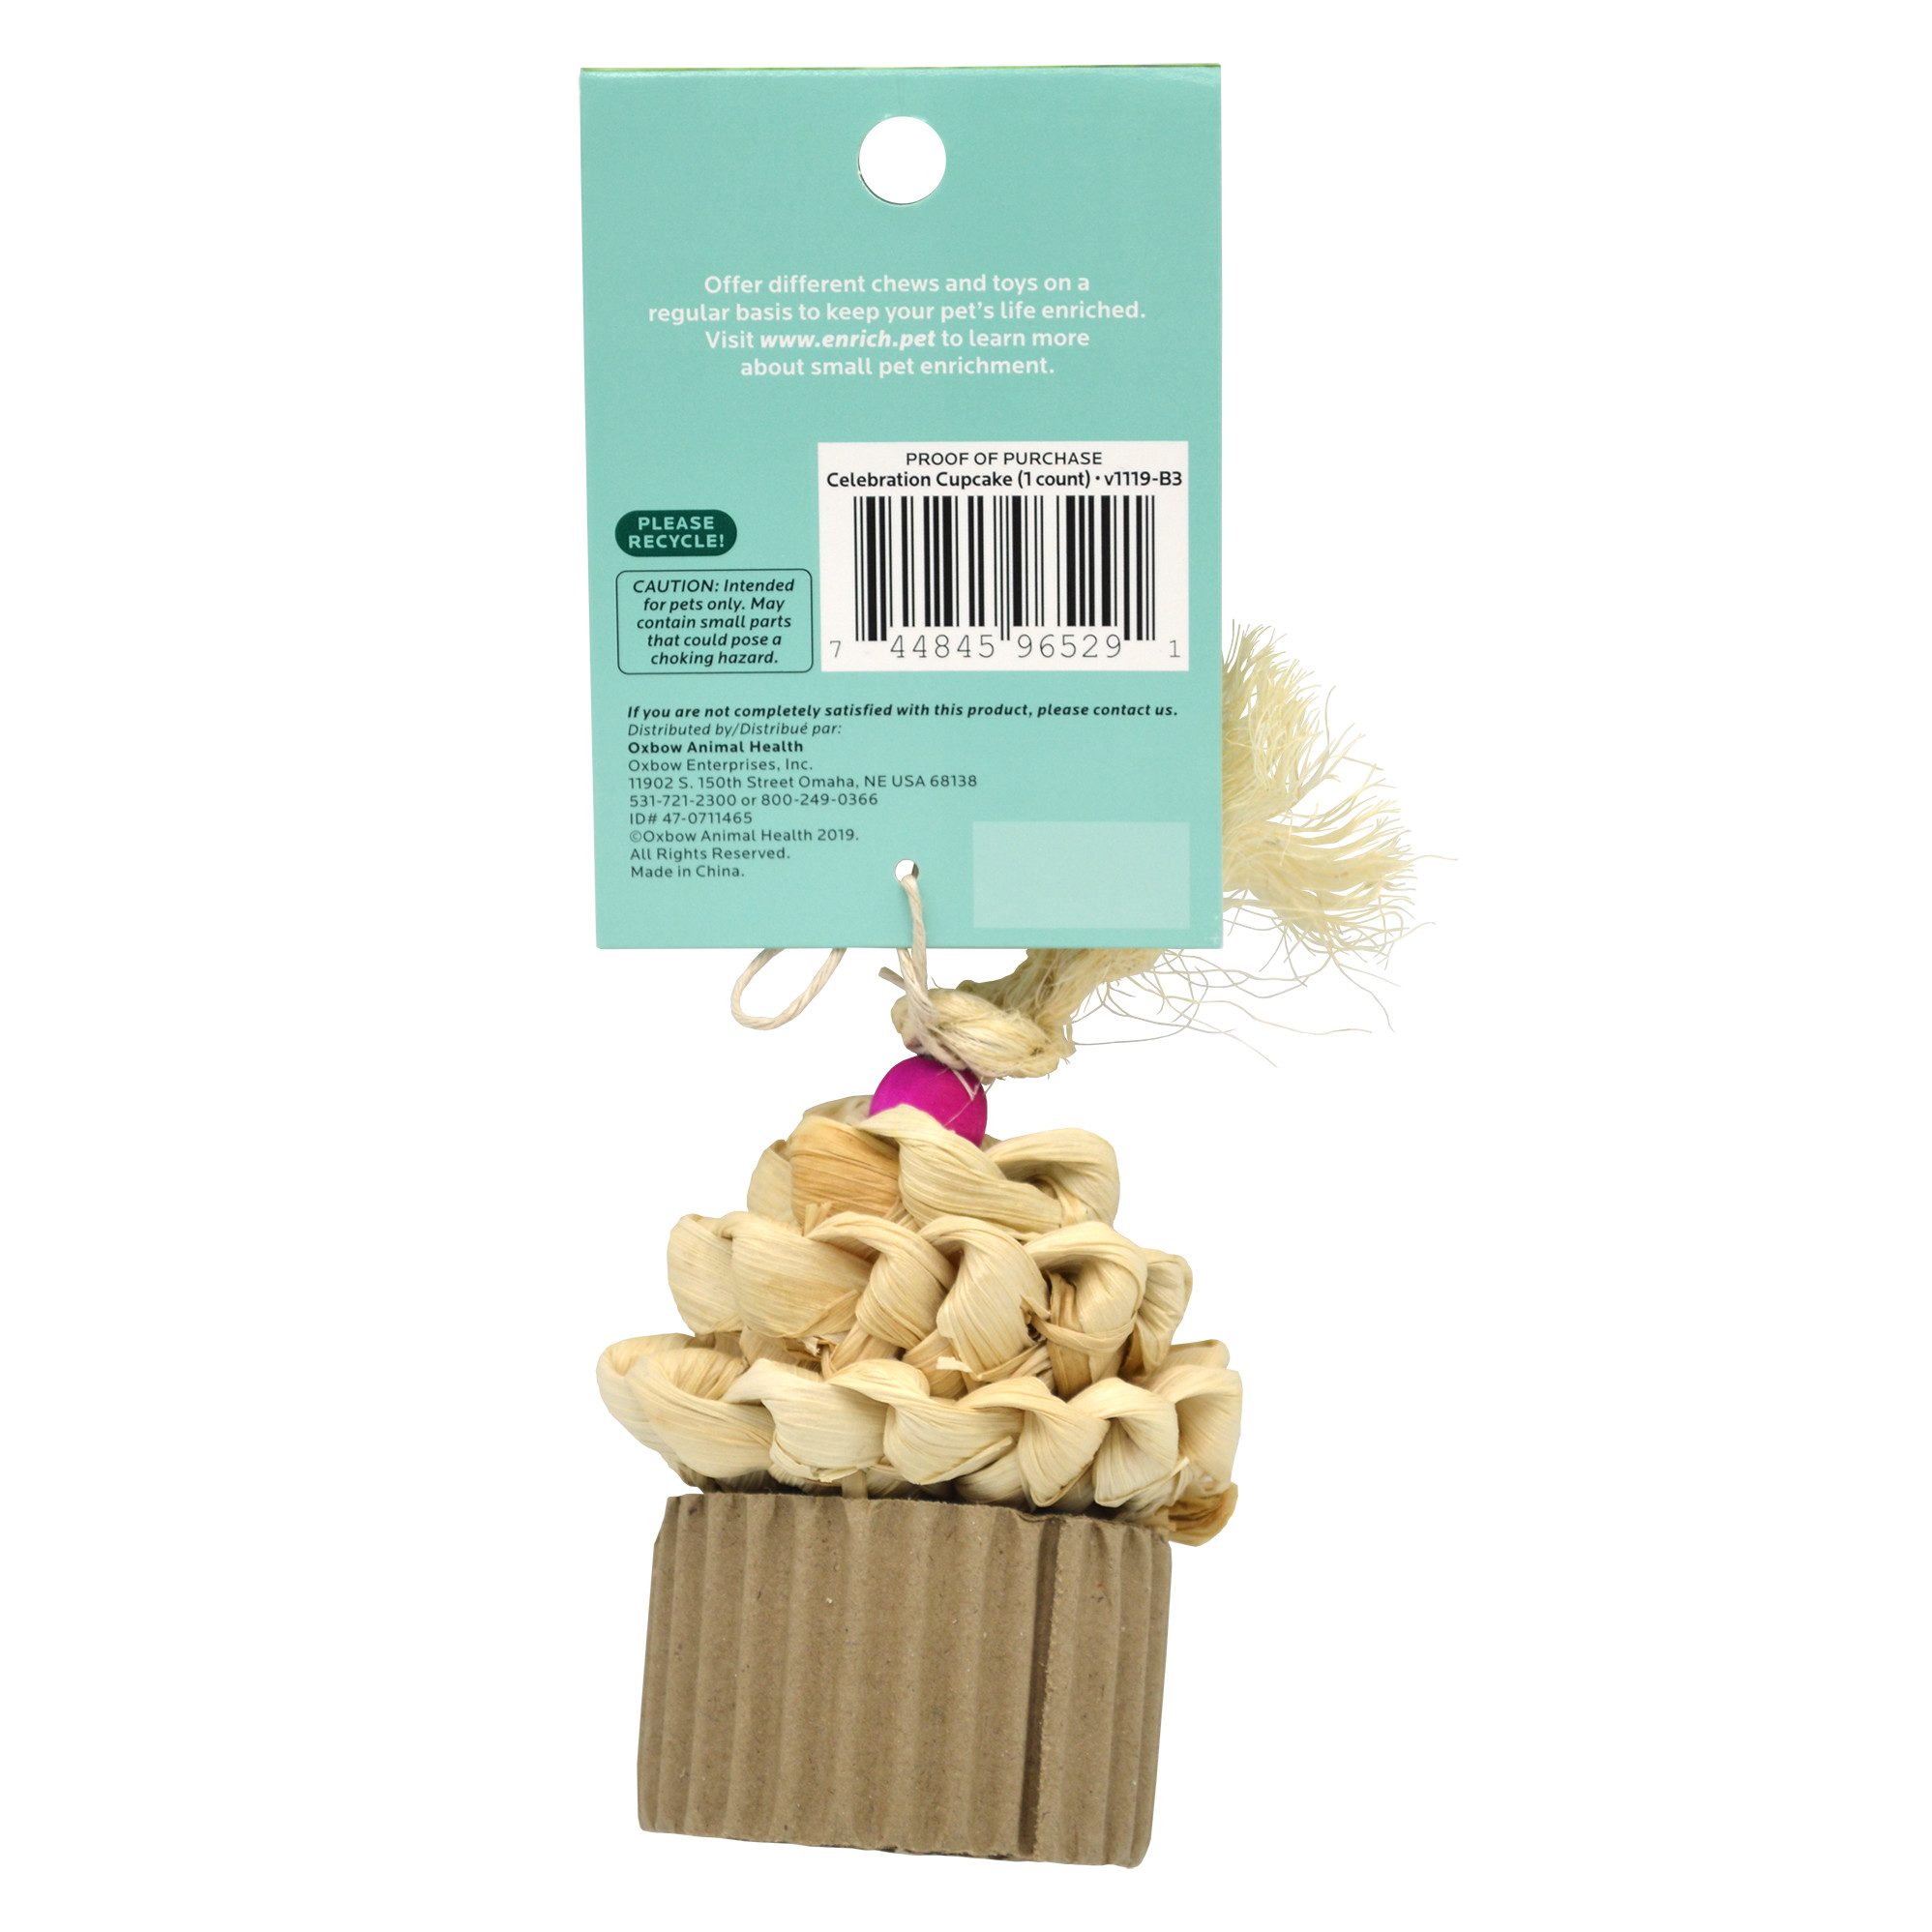 OXBOW Enriched Life Celebration Cupcake Natural Chews